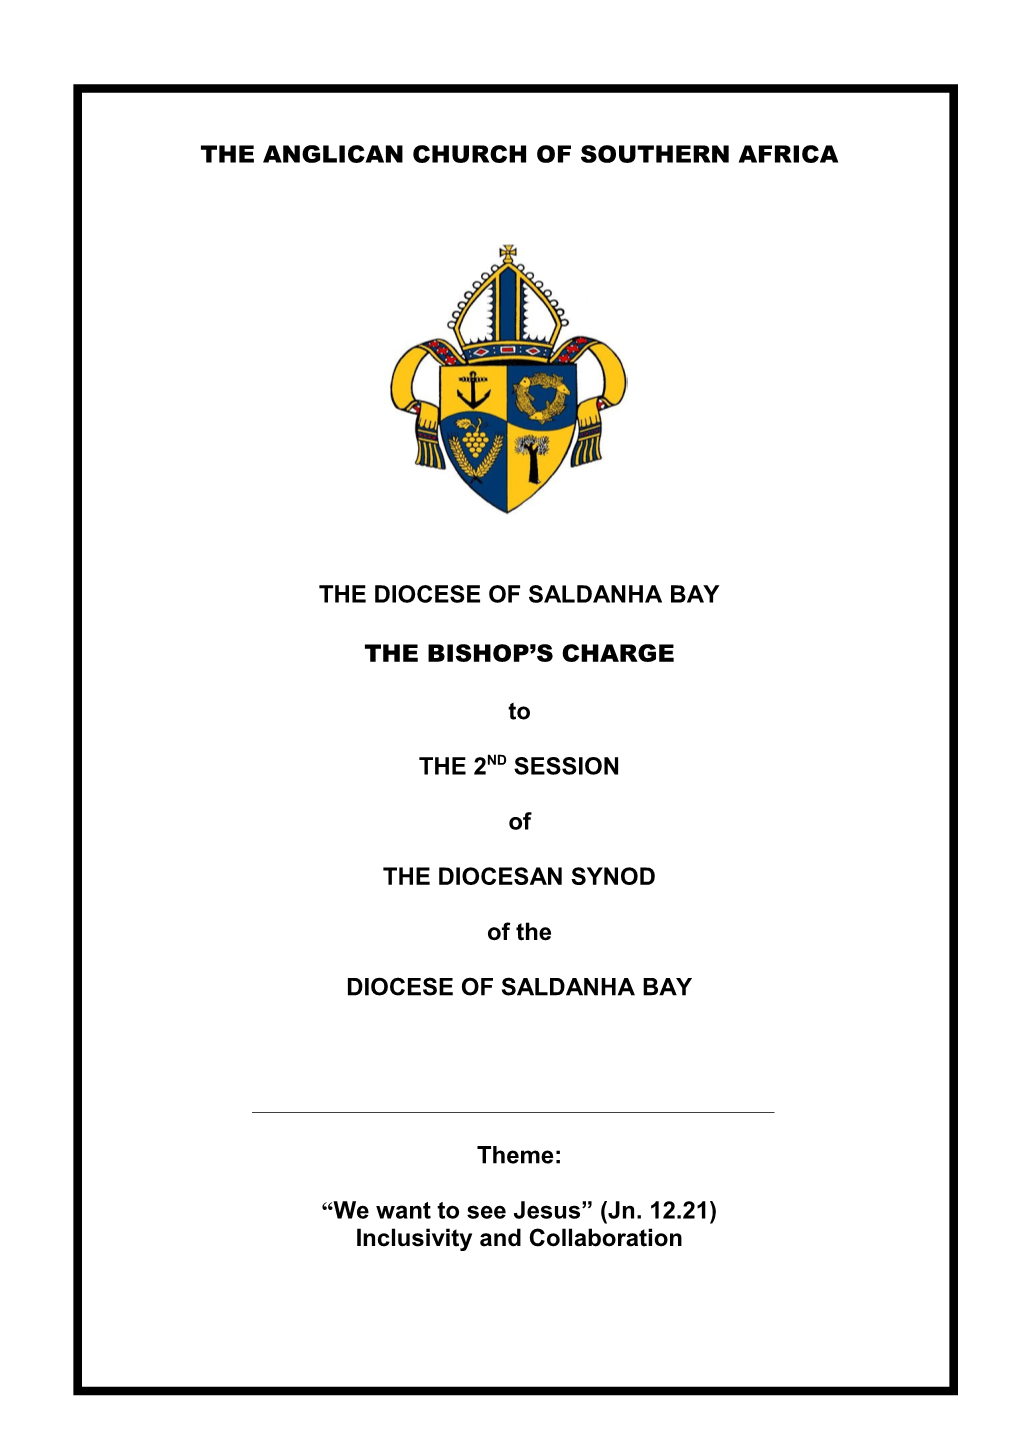 The Diocese of Saldanha Bay